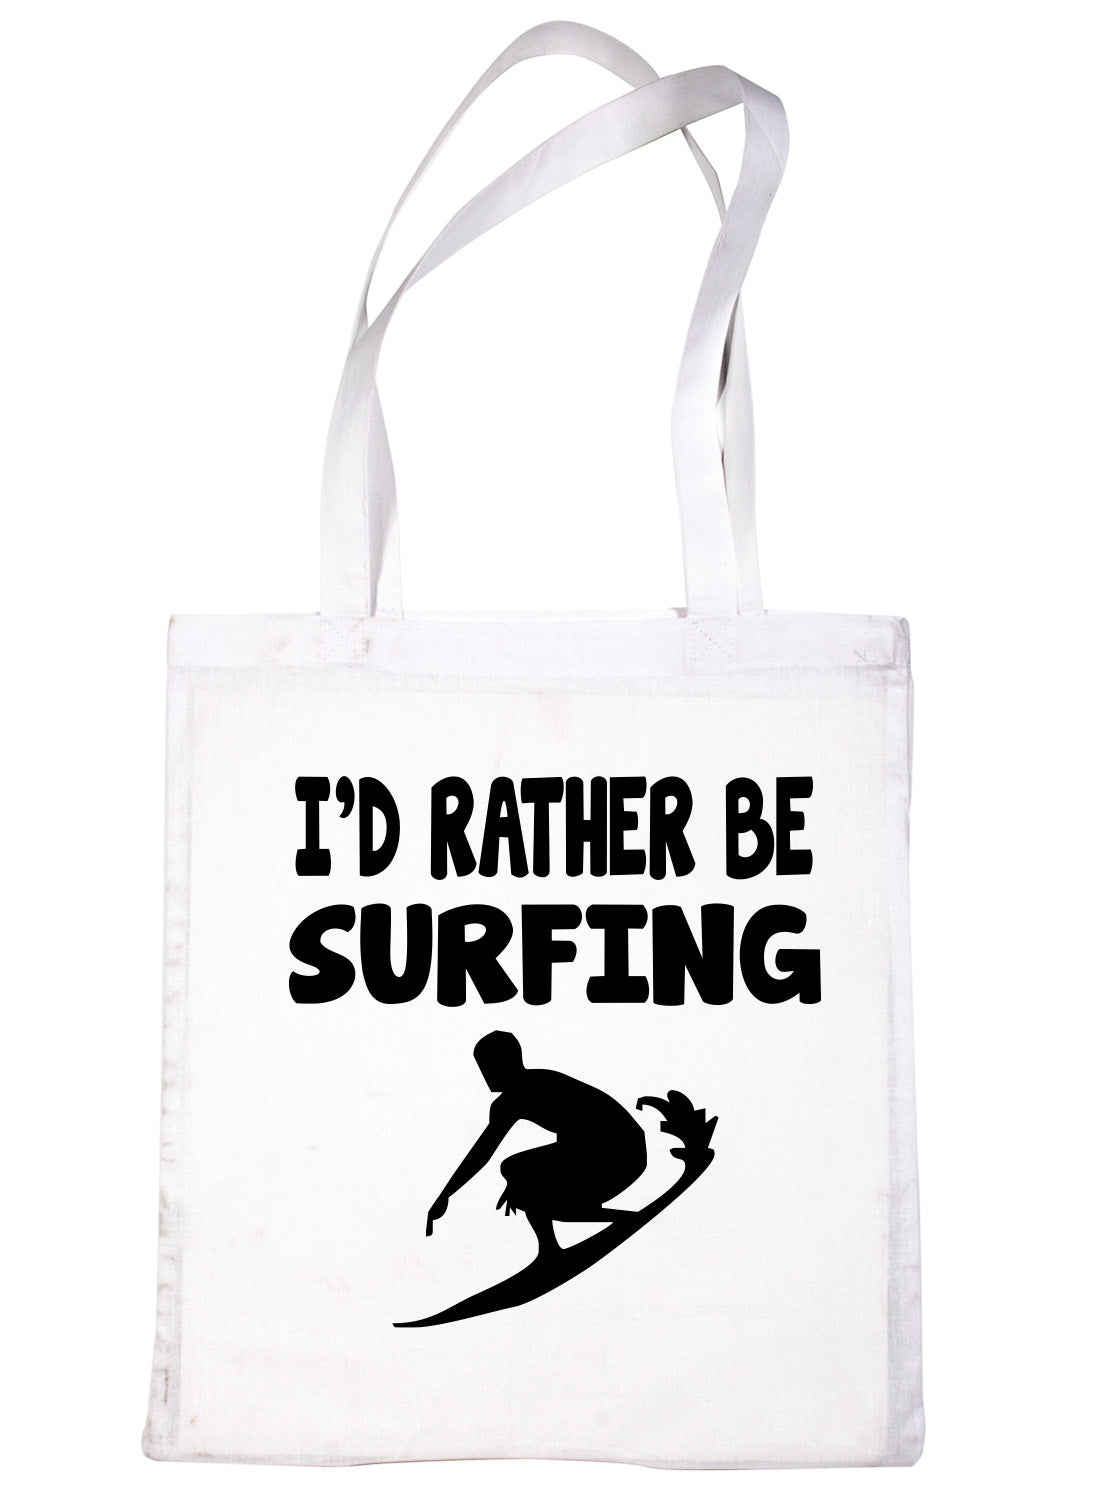 I'd Rather Be Surfing Surfer Shopping Tote Bag Ladies Gift